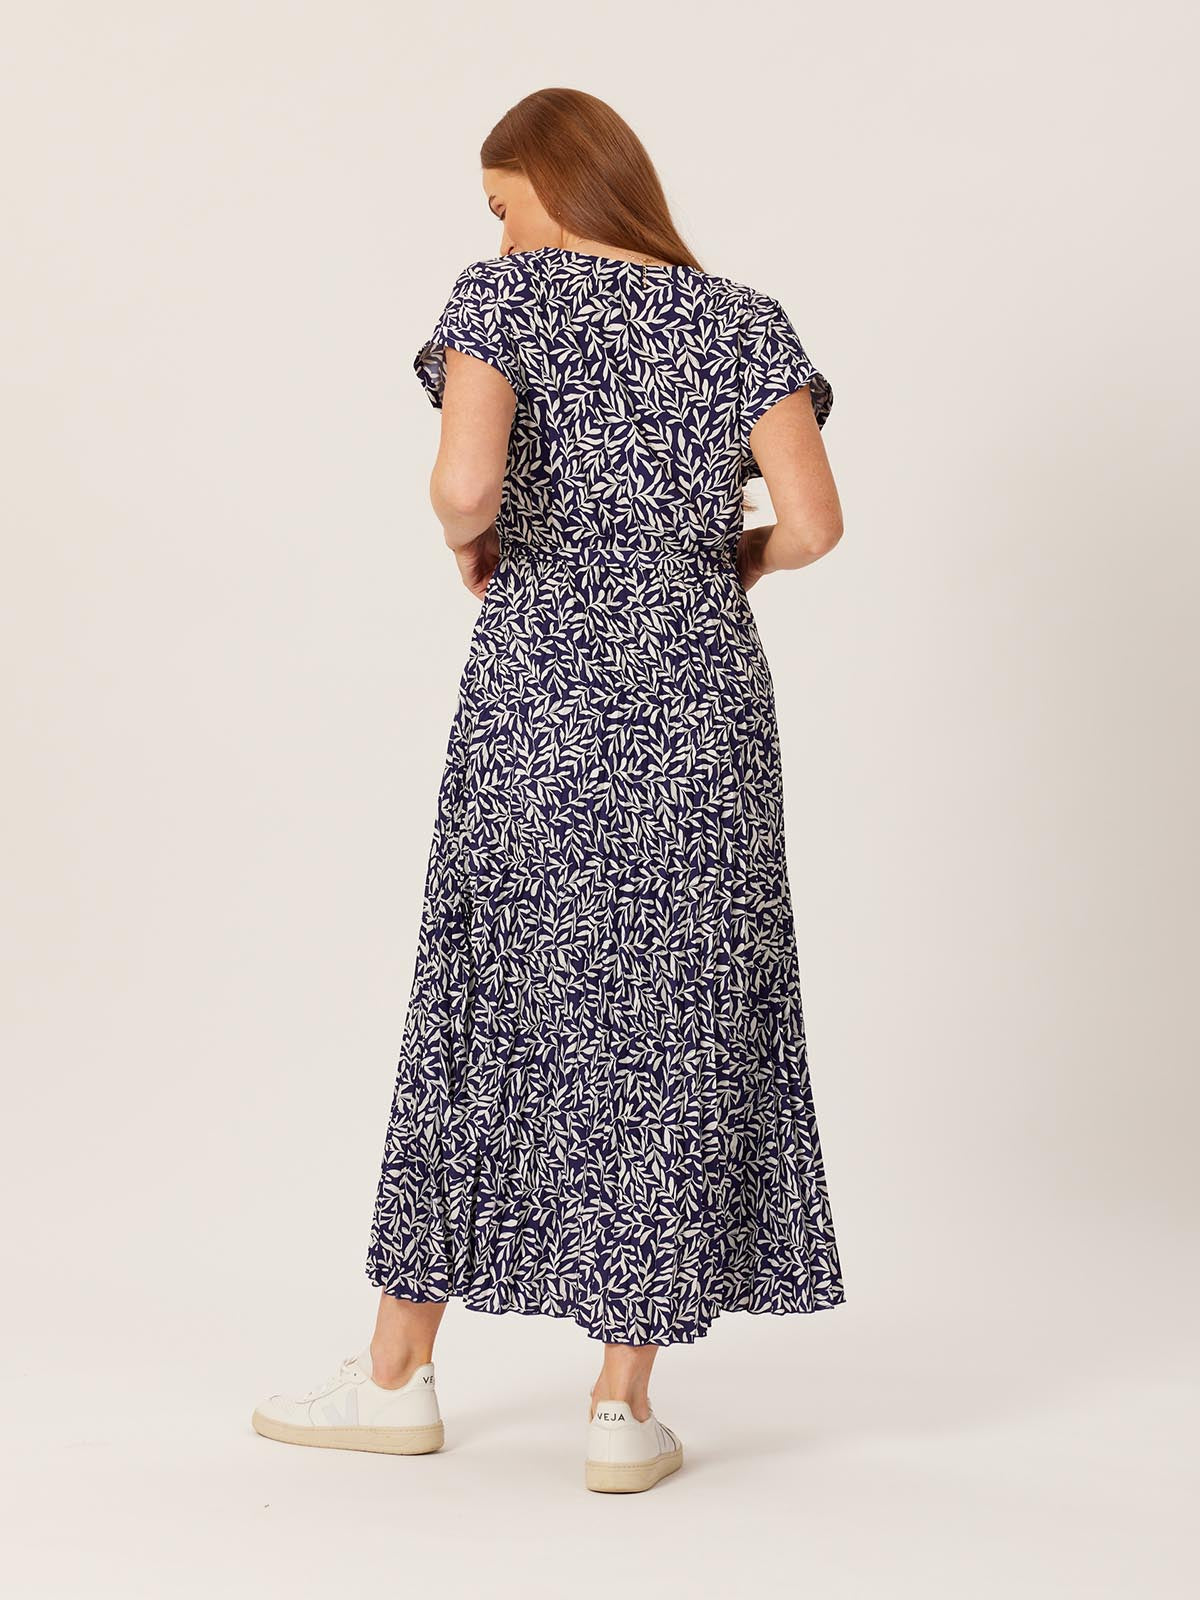 A model wears the Nena wrap dress and is pictured from behind against a white background. Their hair is pushed to one side and they are looking towards the ground. 